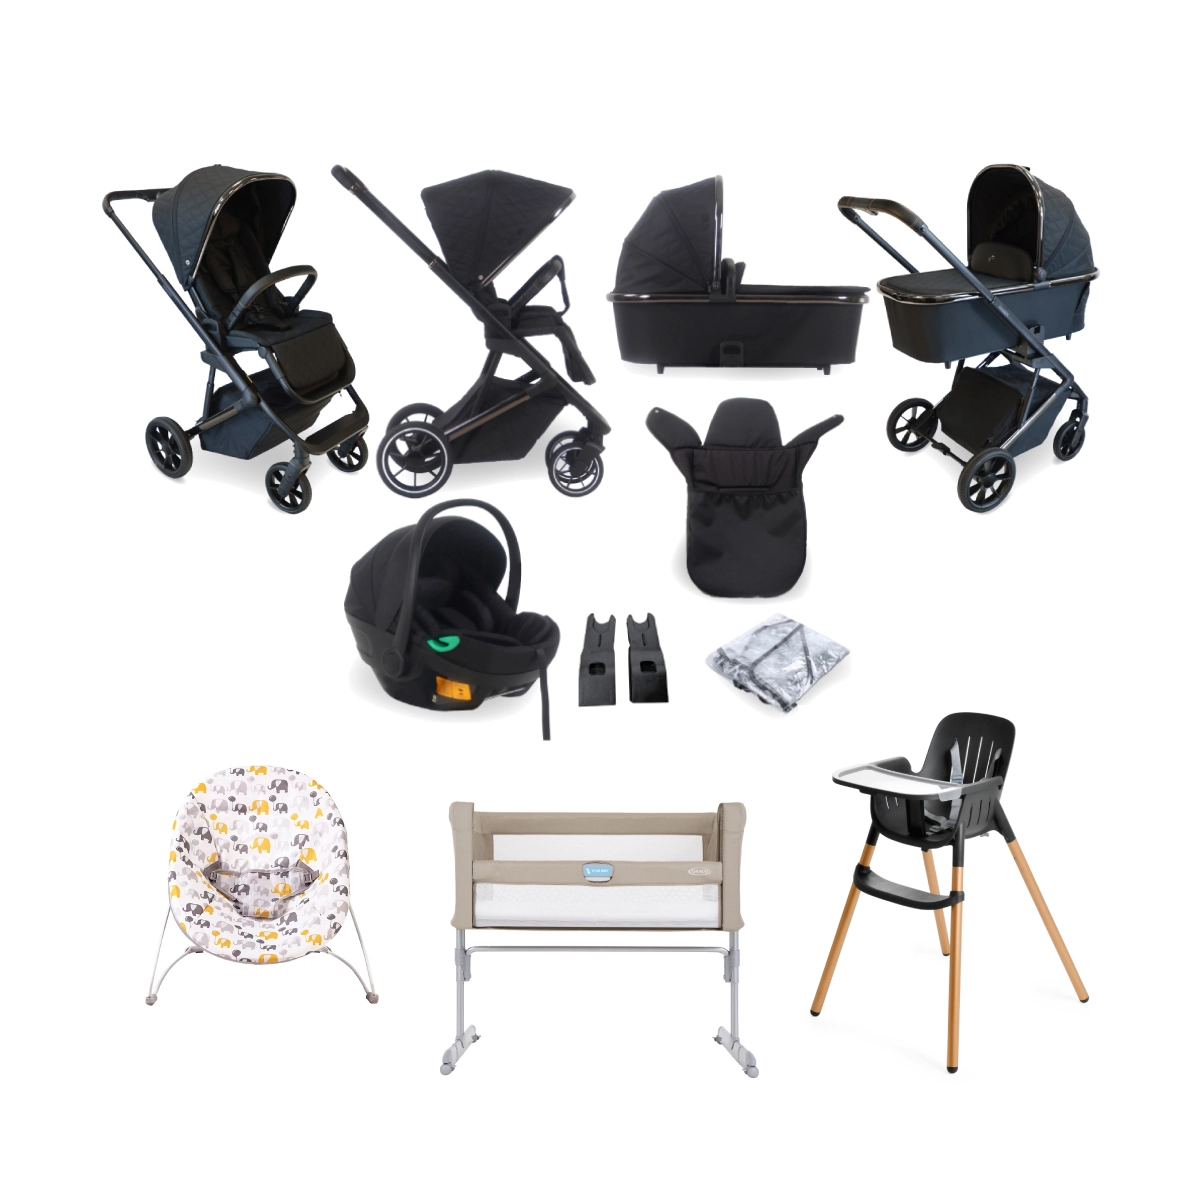 My Babiie MB500i Billie Faiers 11 Piece Everything You Need Travel System Bundle